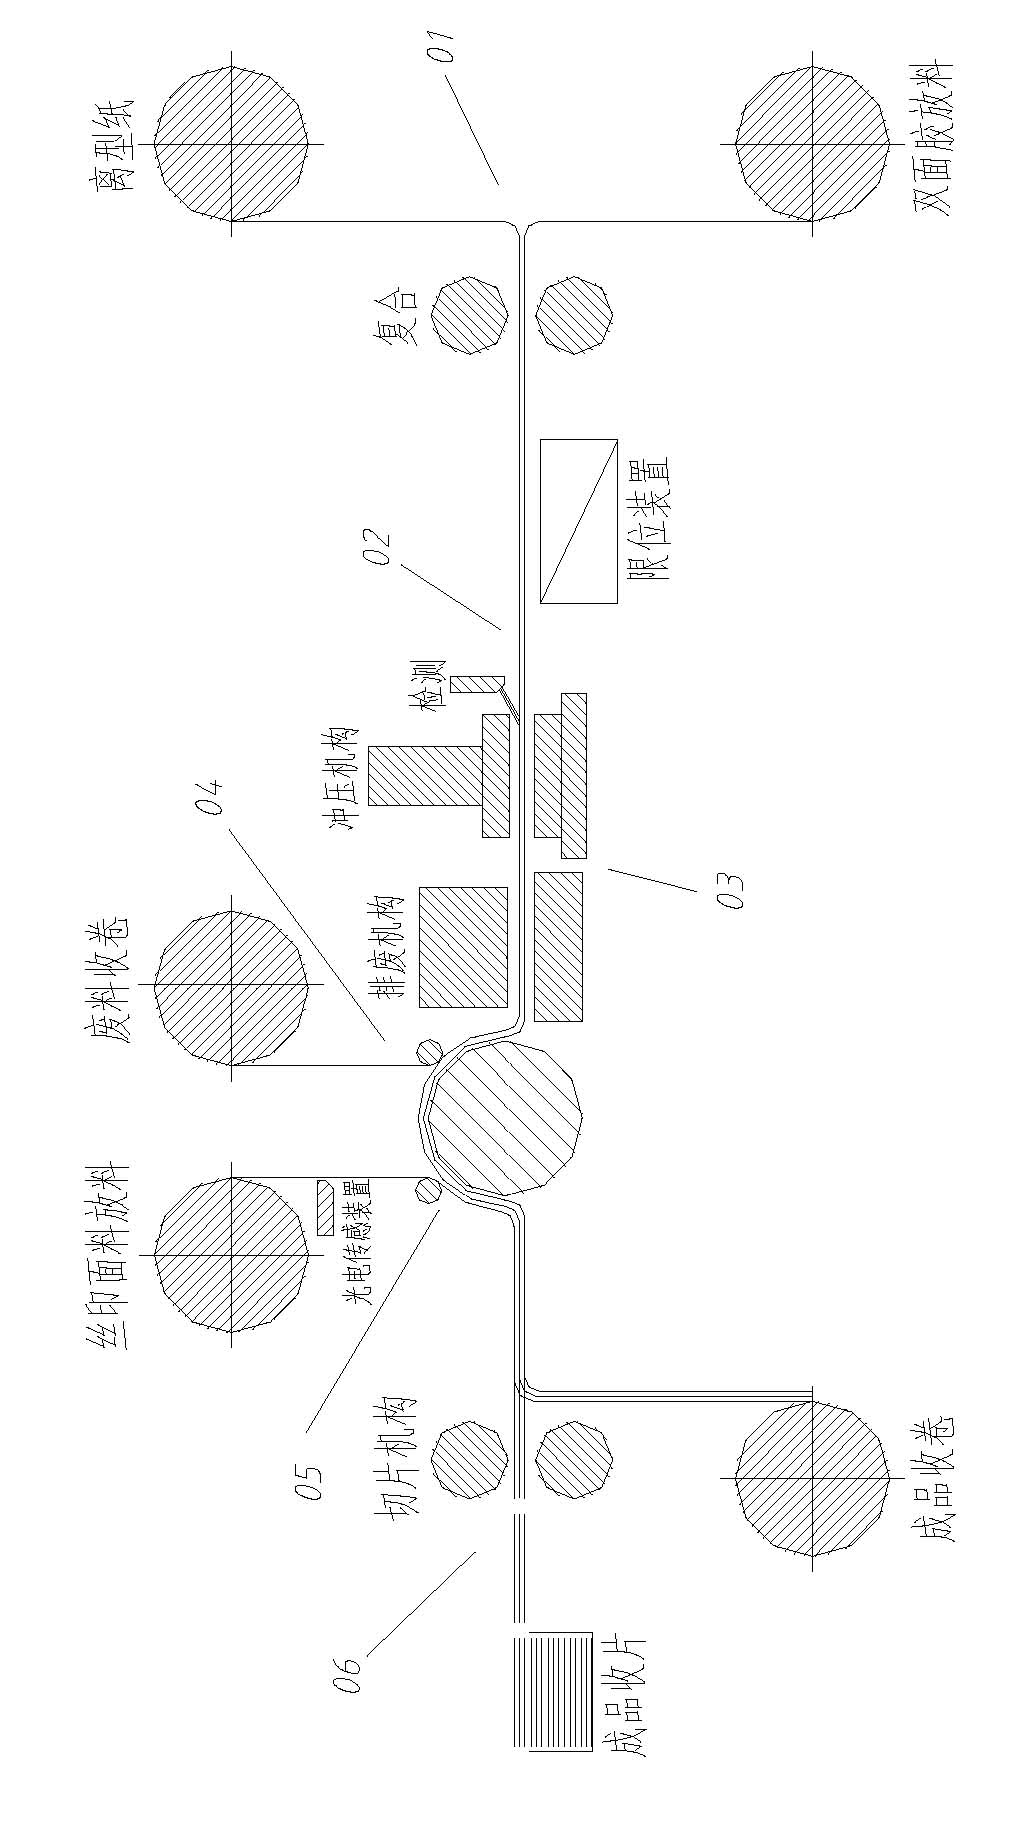 Production method and equipment for full-automatically aligning and gluing name plate